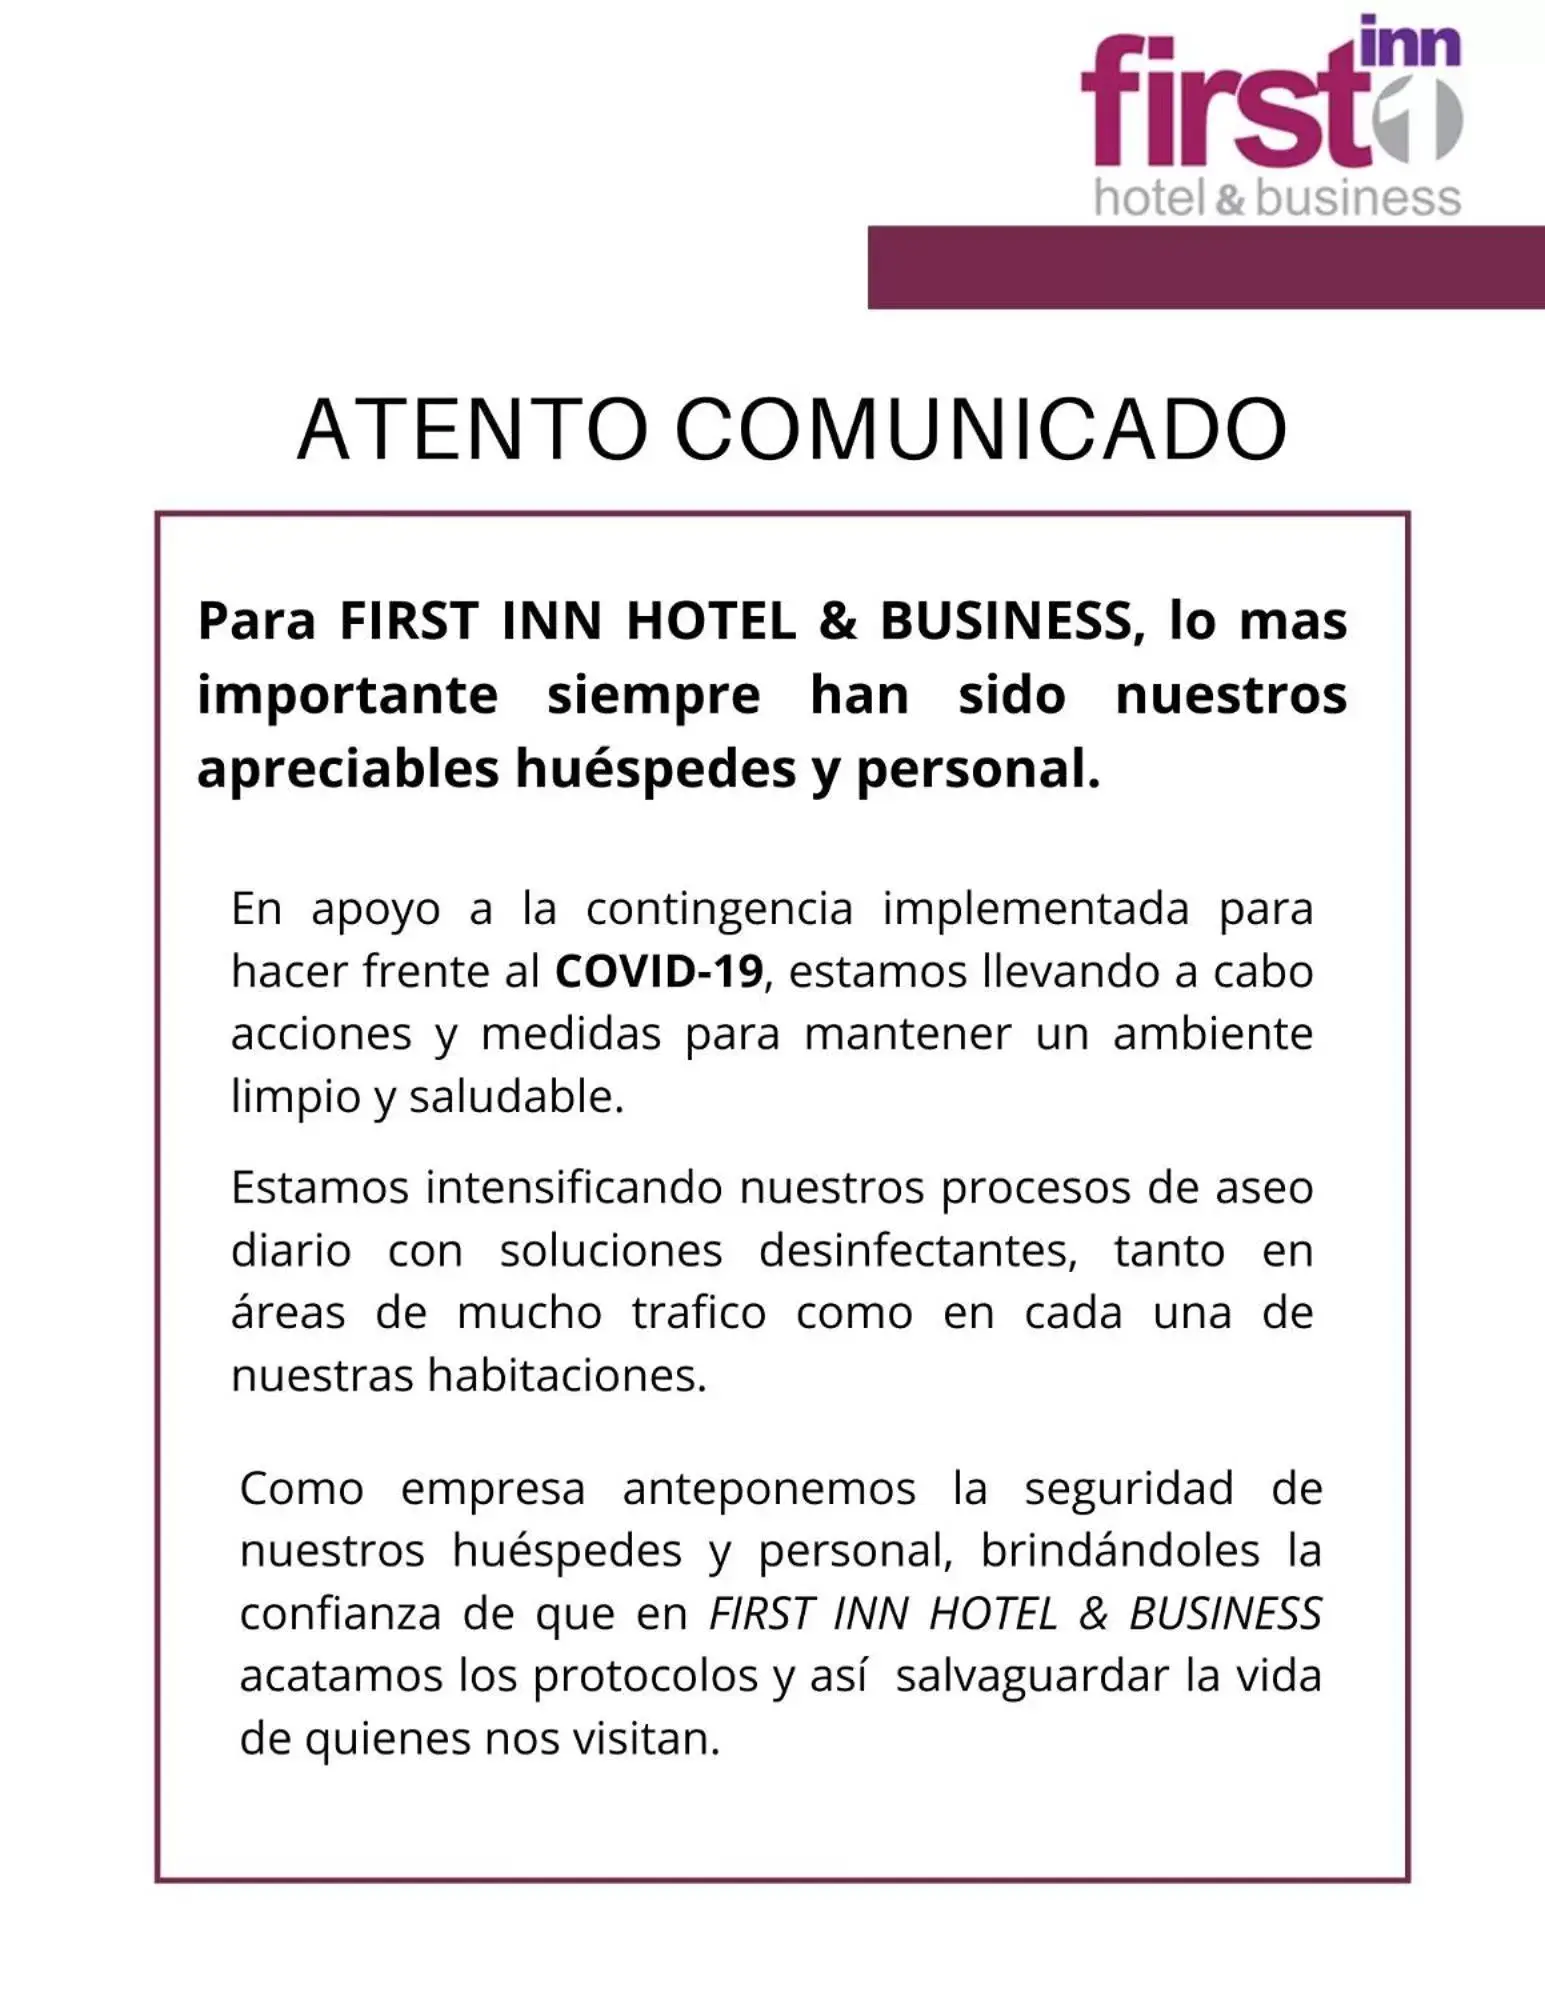 Text overlay in First Inn Hotel & Business